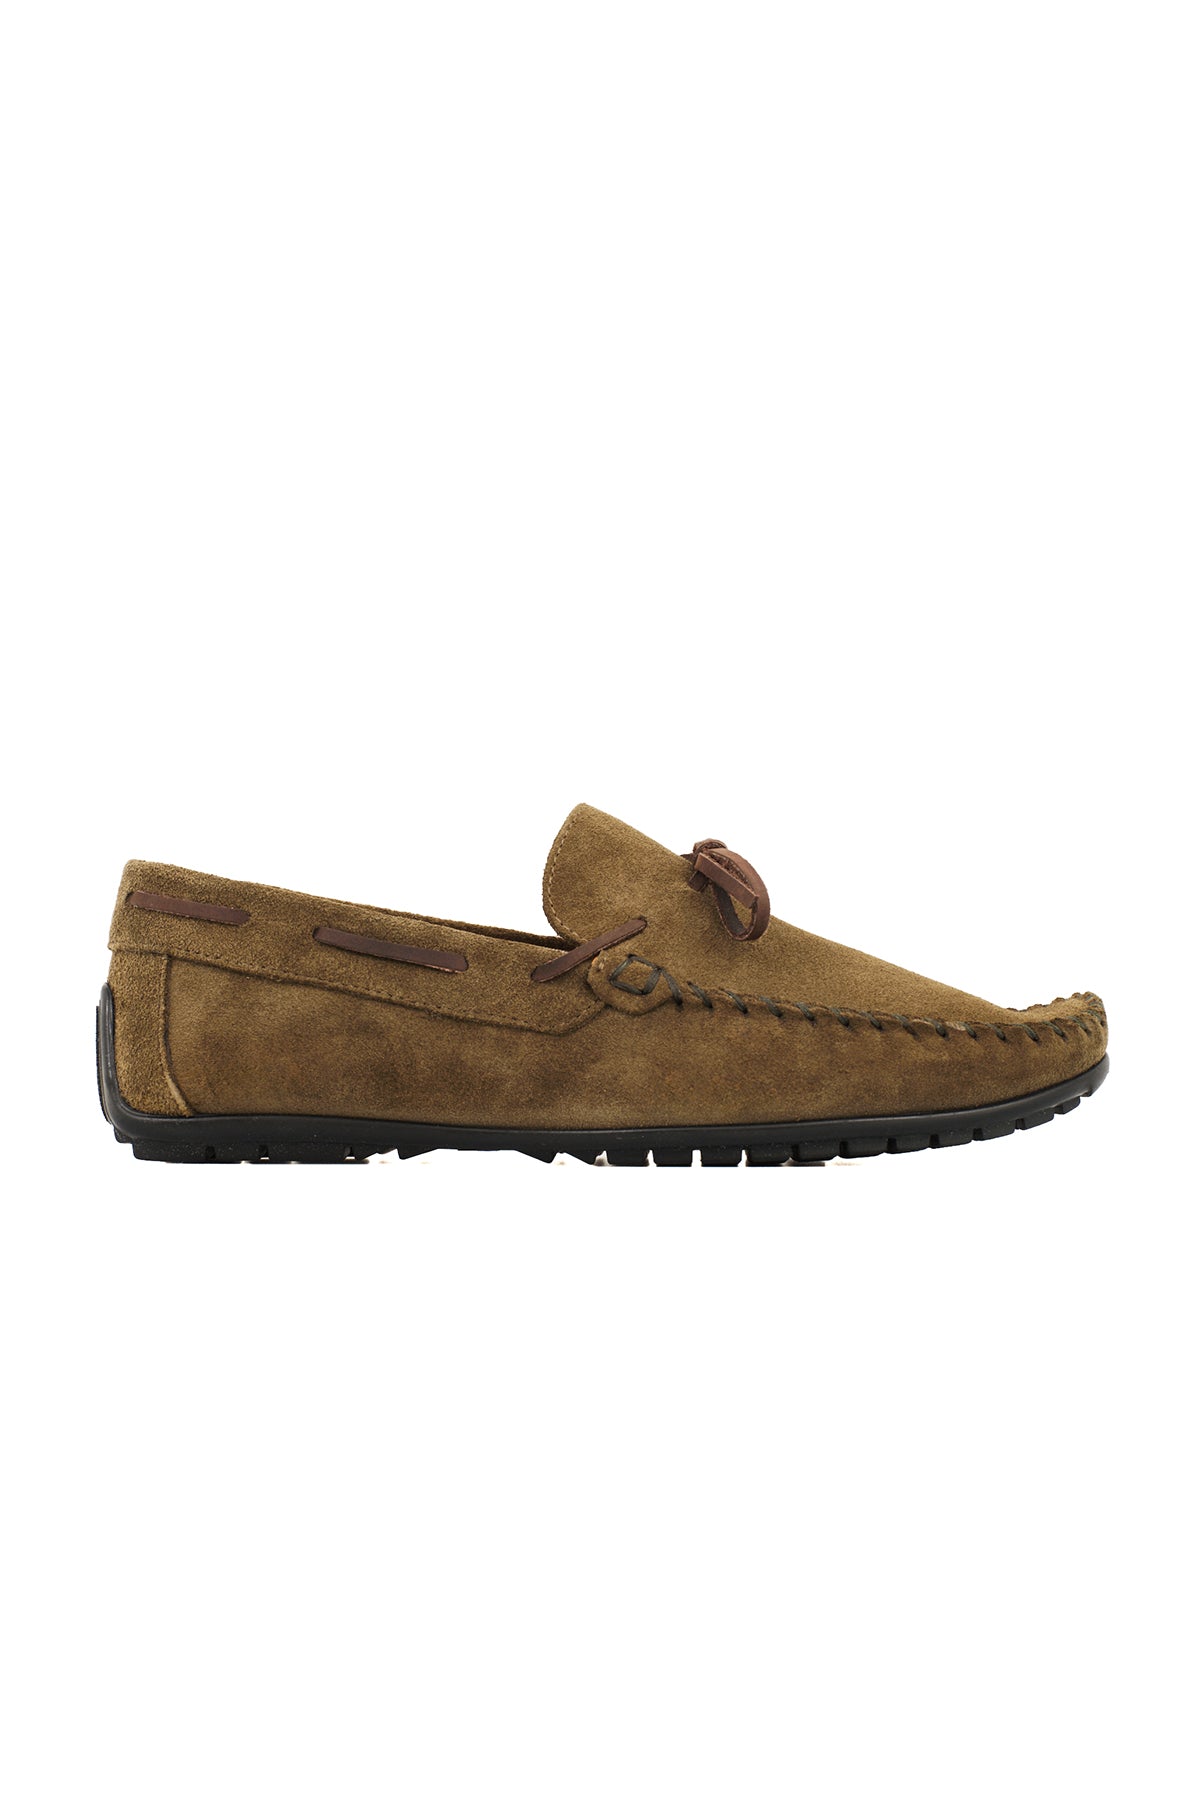 SUEDE CAR LOAFERS ΛΑΔΙ.